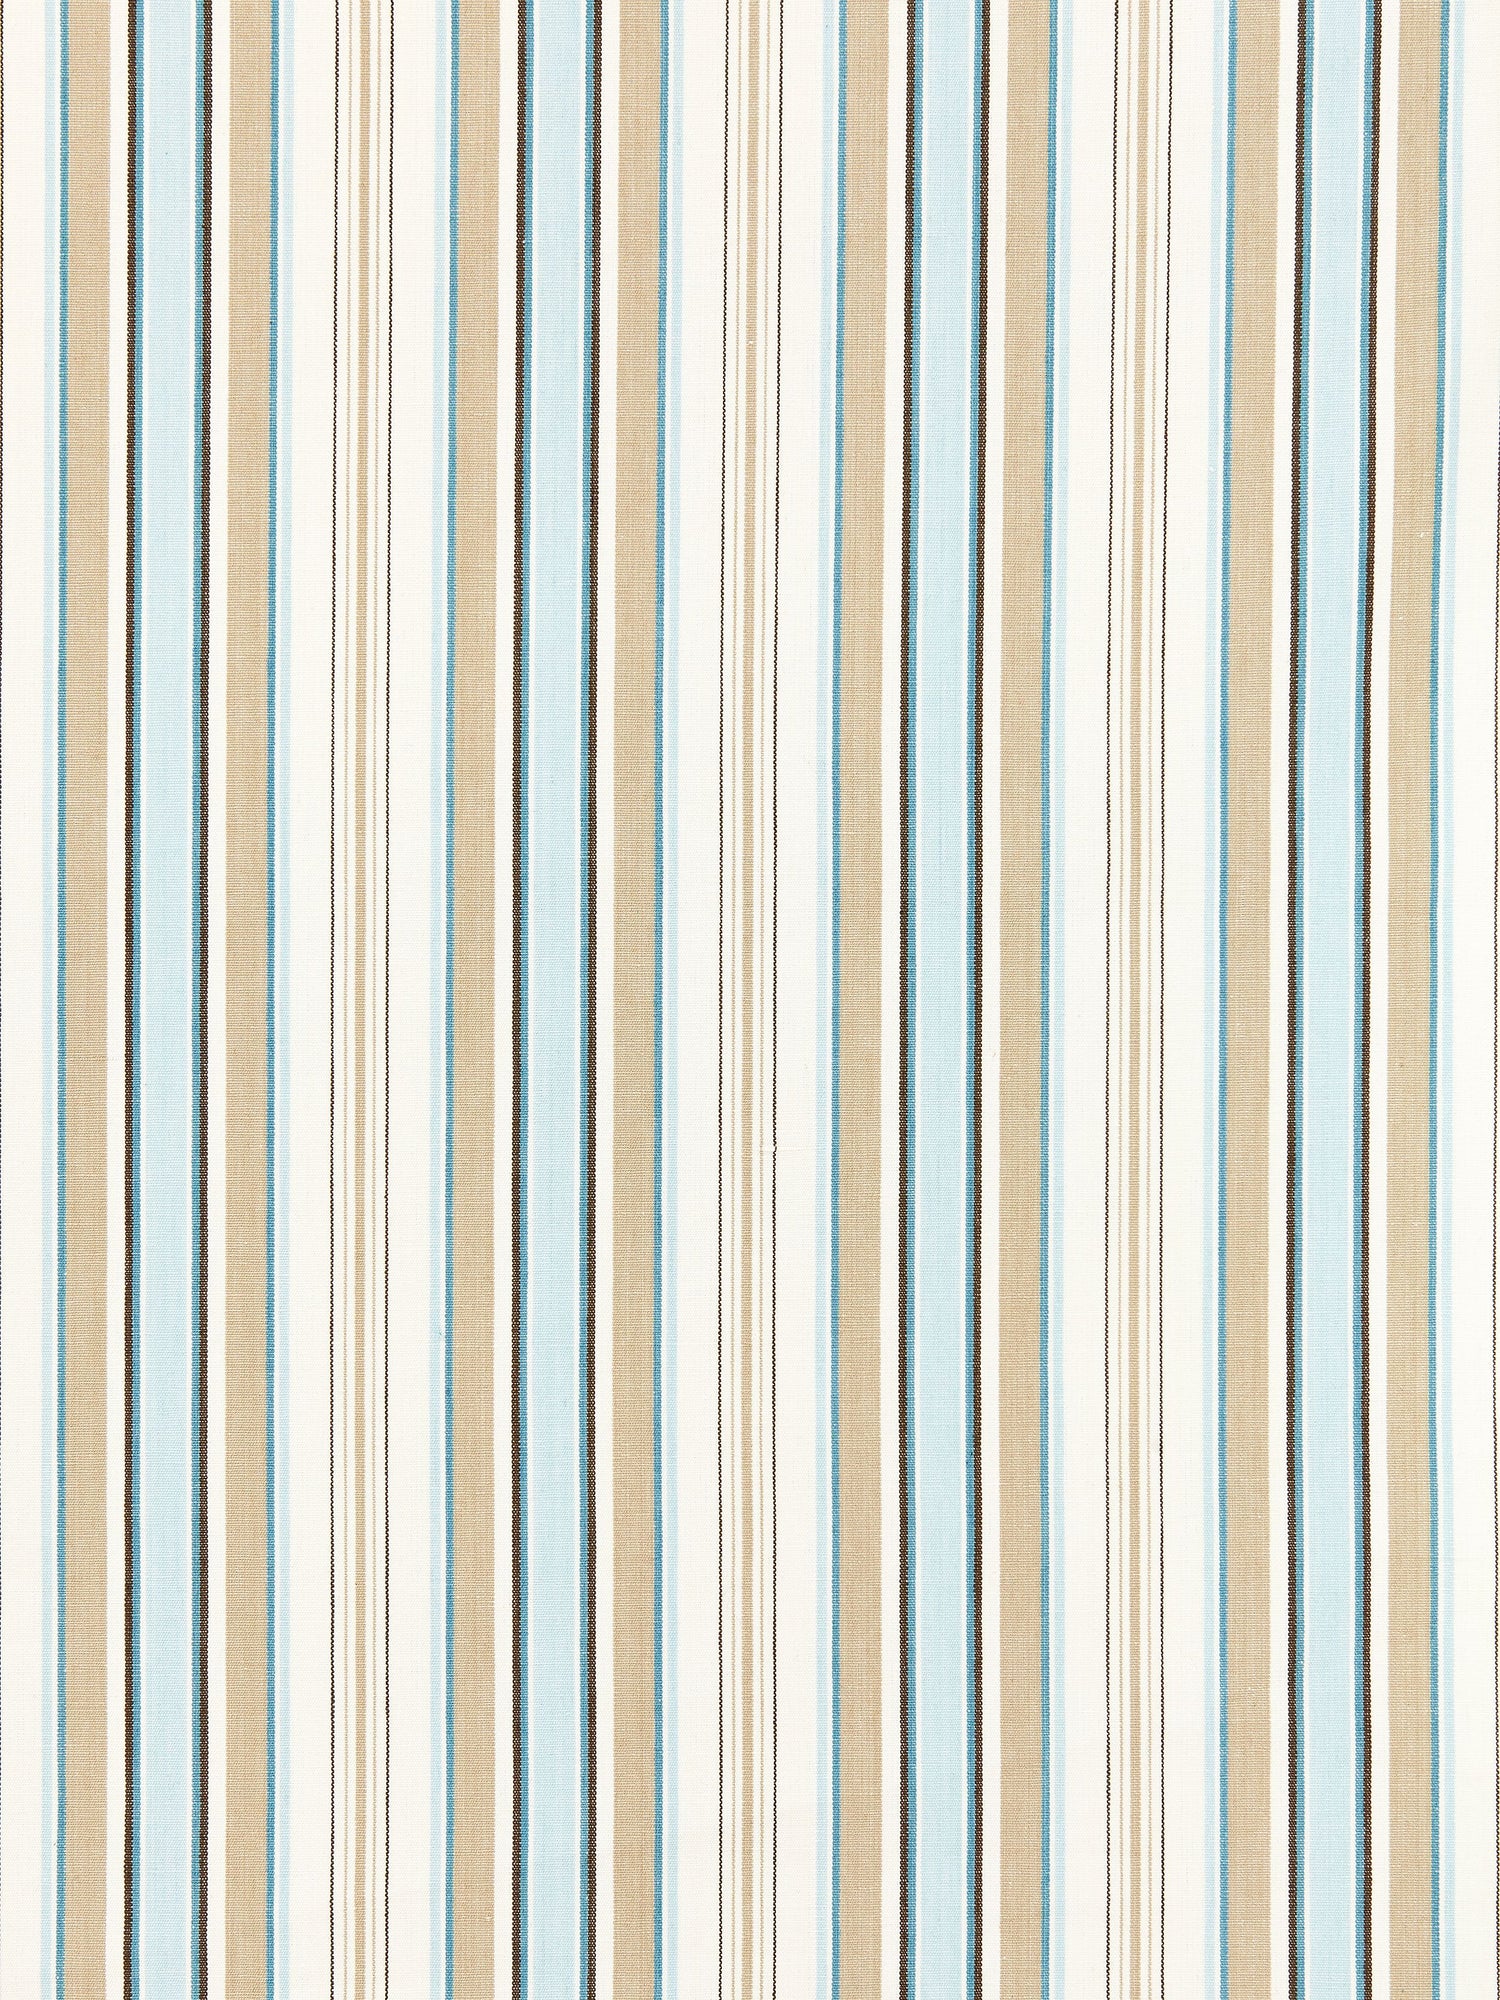 Andover Cotton Stripe fabric in capri color - pattern number SC 000227113 - by Scalamandre in the Scalamandre Fabrics Book 1 collection